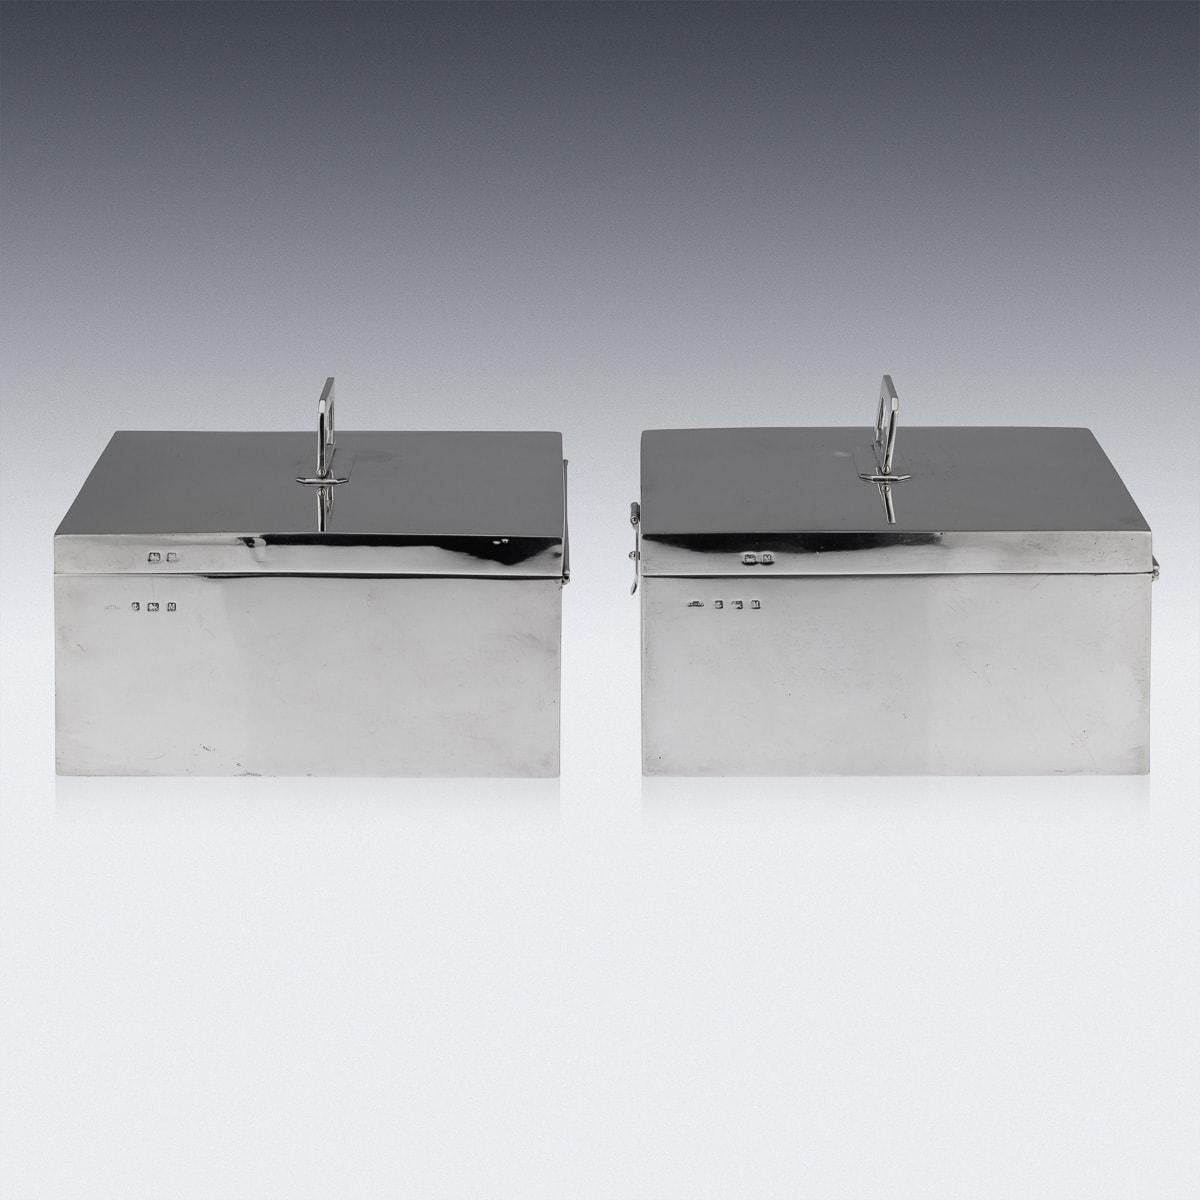 20th Century Art Deco Pair Of Solid Silver Cigar Boxes, Asprey & Co, c.1936 In Good Condition For Sale In Royal Tunbridge Wells, Kent